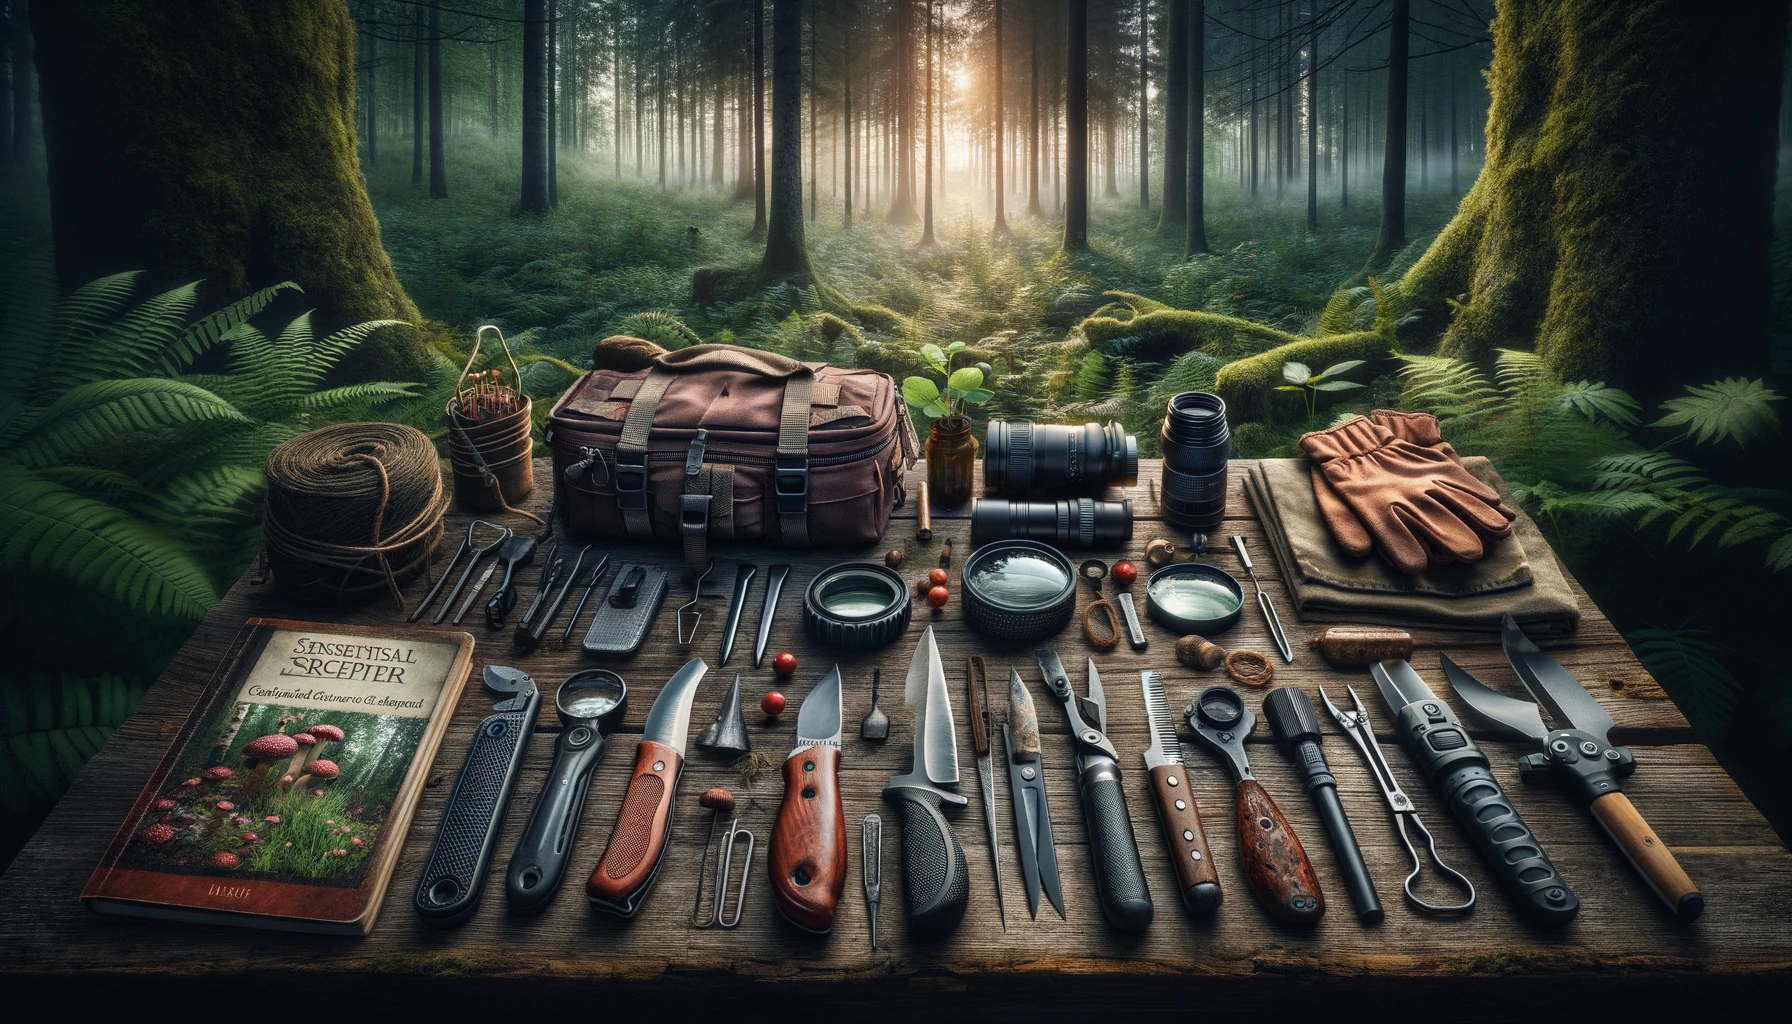 Essential foraging tools, including a durable knife, bag, gloves, trowel, pruning shear, magnifying glass, and field guide, organized on a rustic wooden surface with a lush forest backdrop, highlighting the adventure and readiness of foragers with natural lighting enhancing tool textures